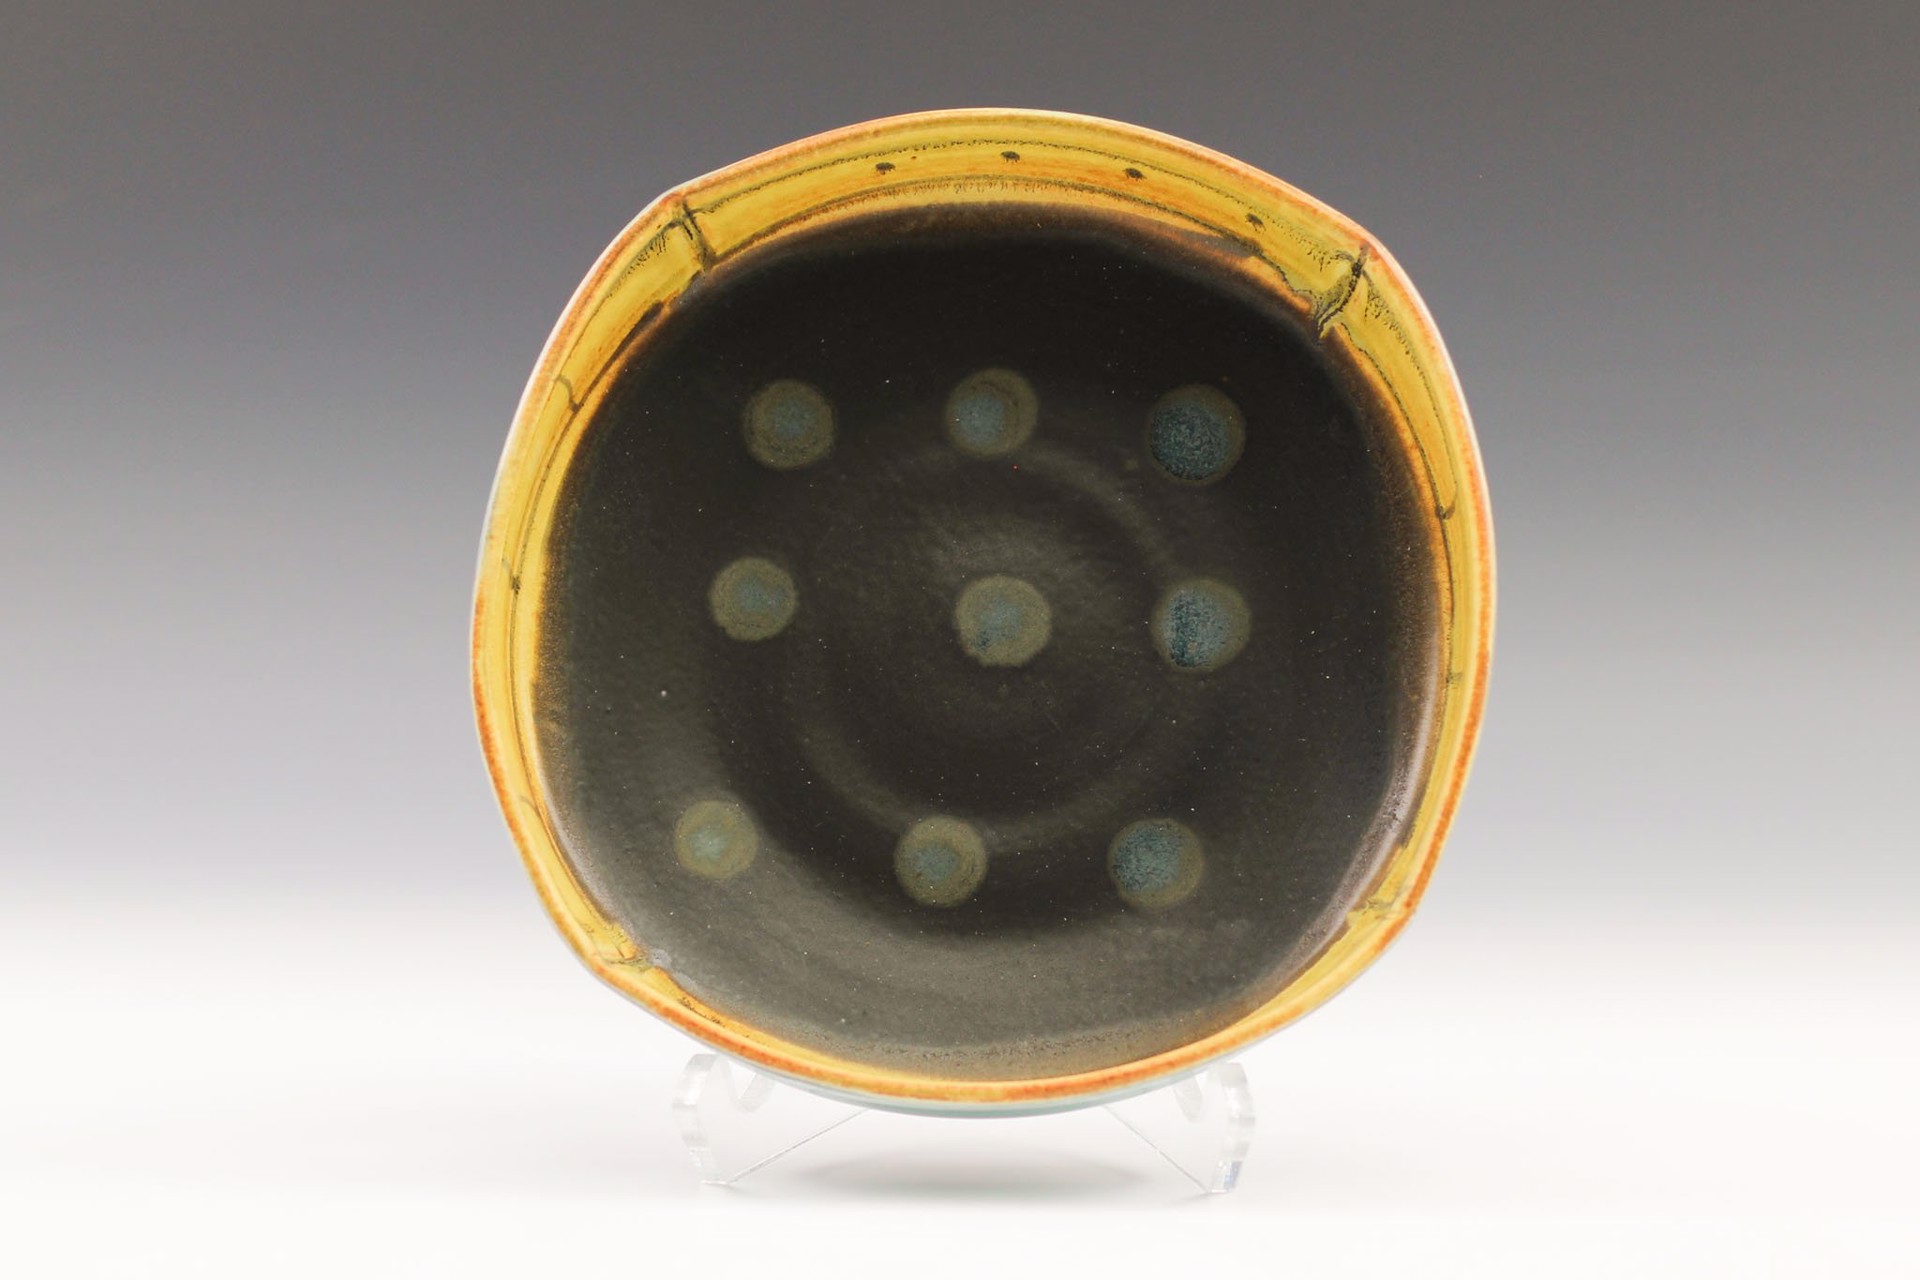 Medium Low Bowl by Delores Fortuna